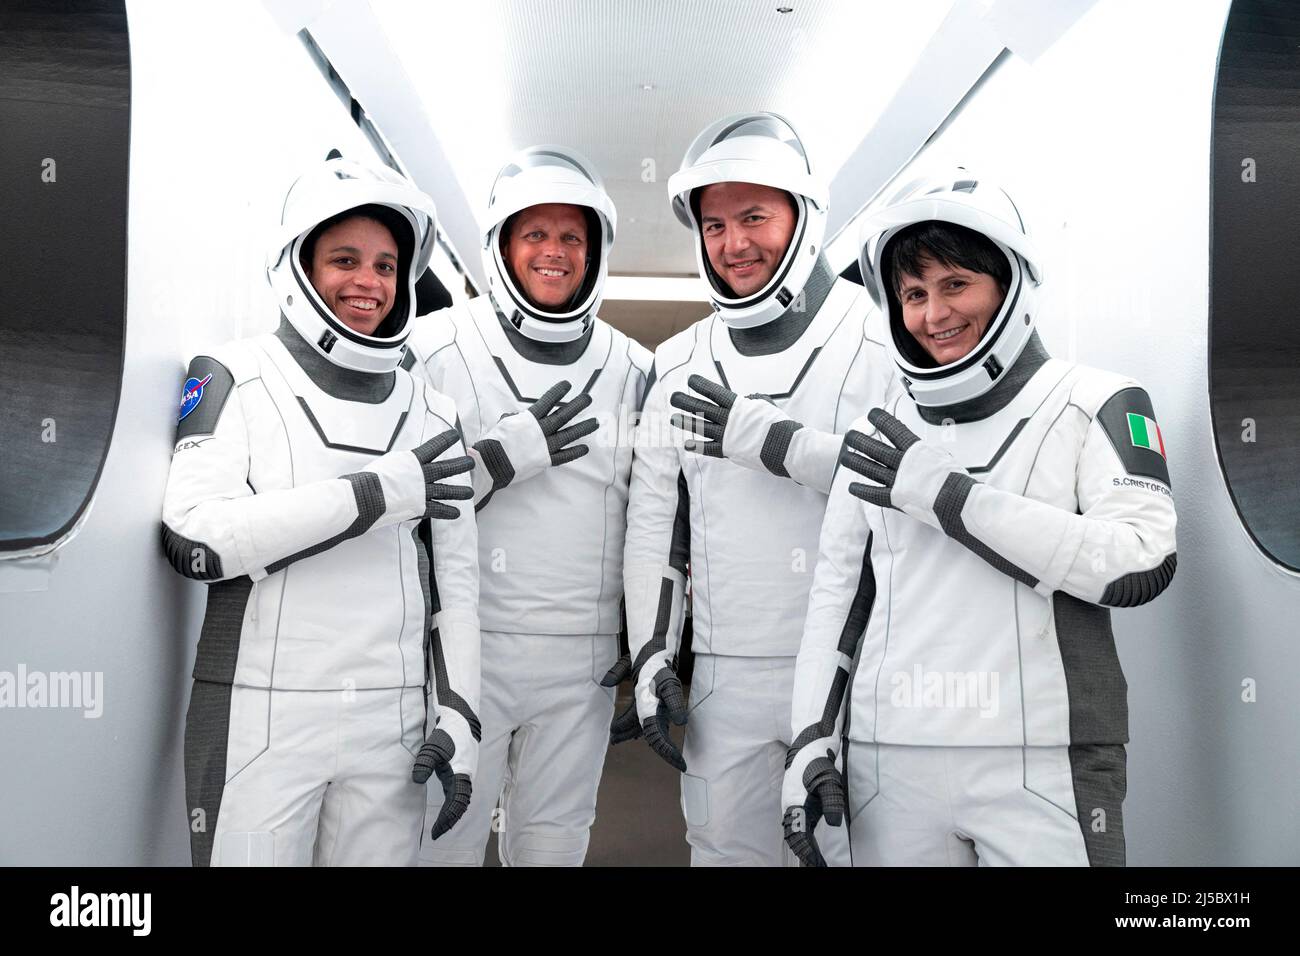 Crew-4 astronauts, from left, Jessica Watson, mission specialist; Bob Hines, pilot; Kjell Lindgren, commander and Samantha Cristoforetti, mission specialist, pose outside SpaceX’s Crew Dragon, named Freedom by the Crew-4 crew, during a dry dress rehearsal at Kennedy Space Center in Florida on April 20, 2022. Crew-4 will launch the astronauts to the International Space Station as part of NASA’s Commercial Crew Program. Liftoff is targeted for 5:26 a.m. EDT on Saturday, April 23, 2022, from Launch Complex 39A at Kennedy. Photo by SpaceX via CNP/ABACAPRESS.COM Stock Photo